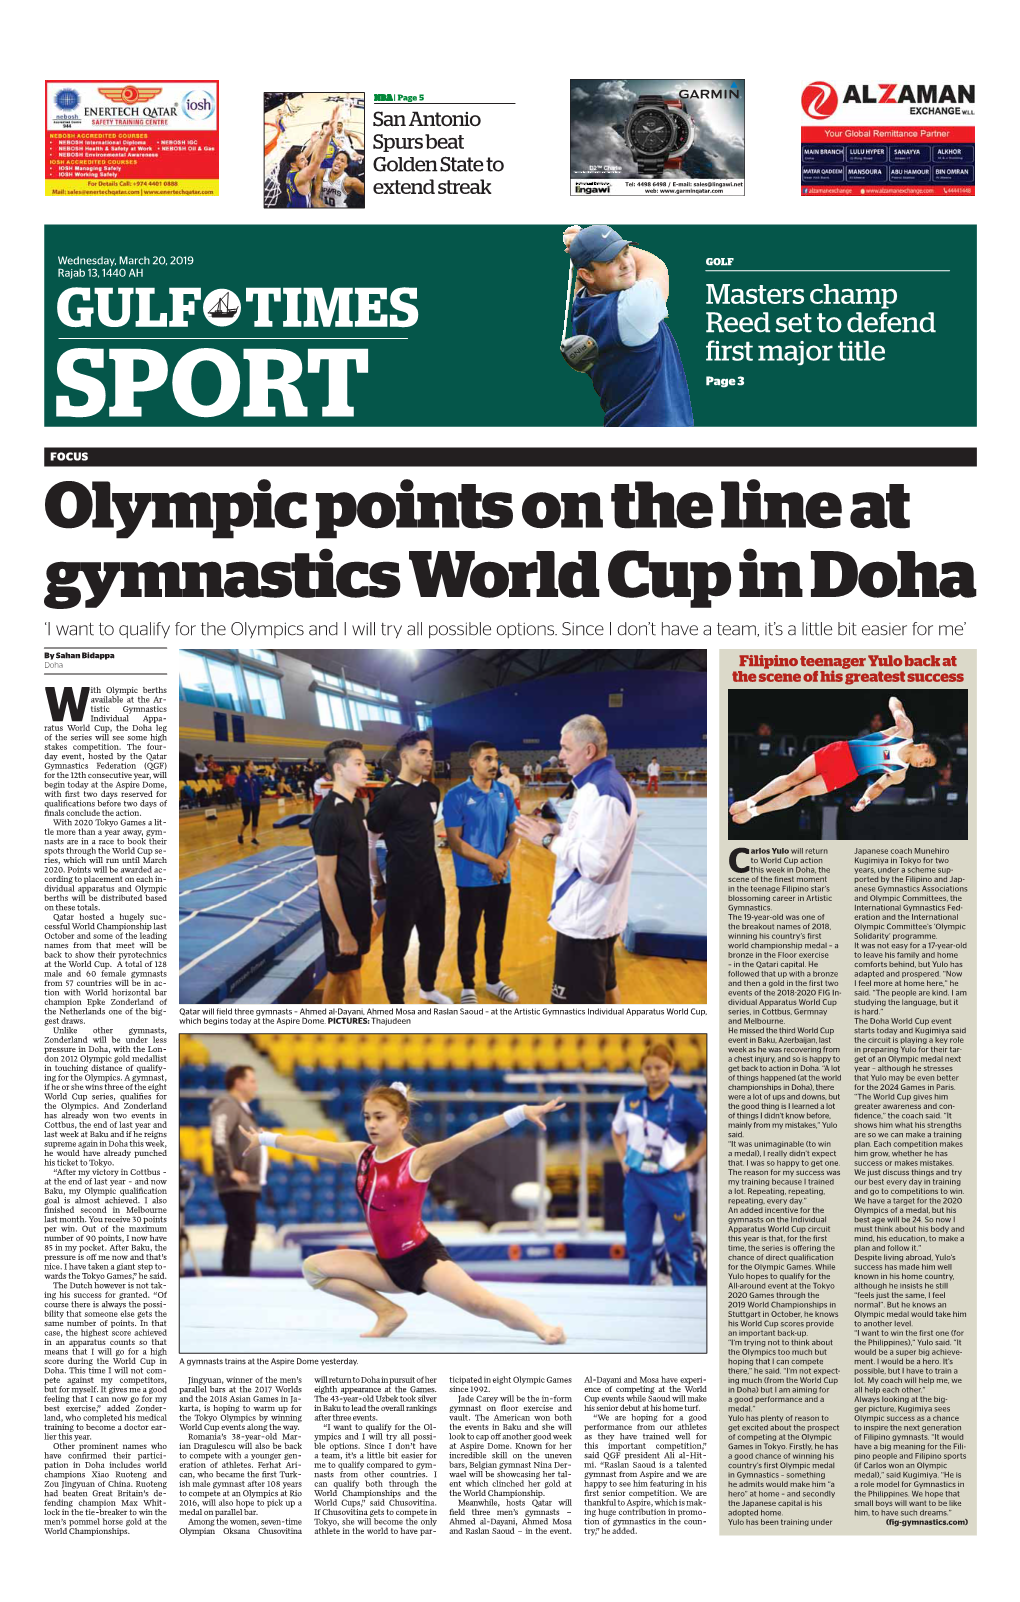 Olympic Points on the Line at Gymnastics World Cup in Doha ‘I Want to Qualify for the Olympics and I Will Try All Possible Options